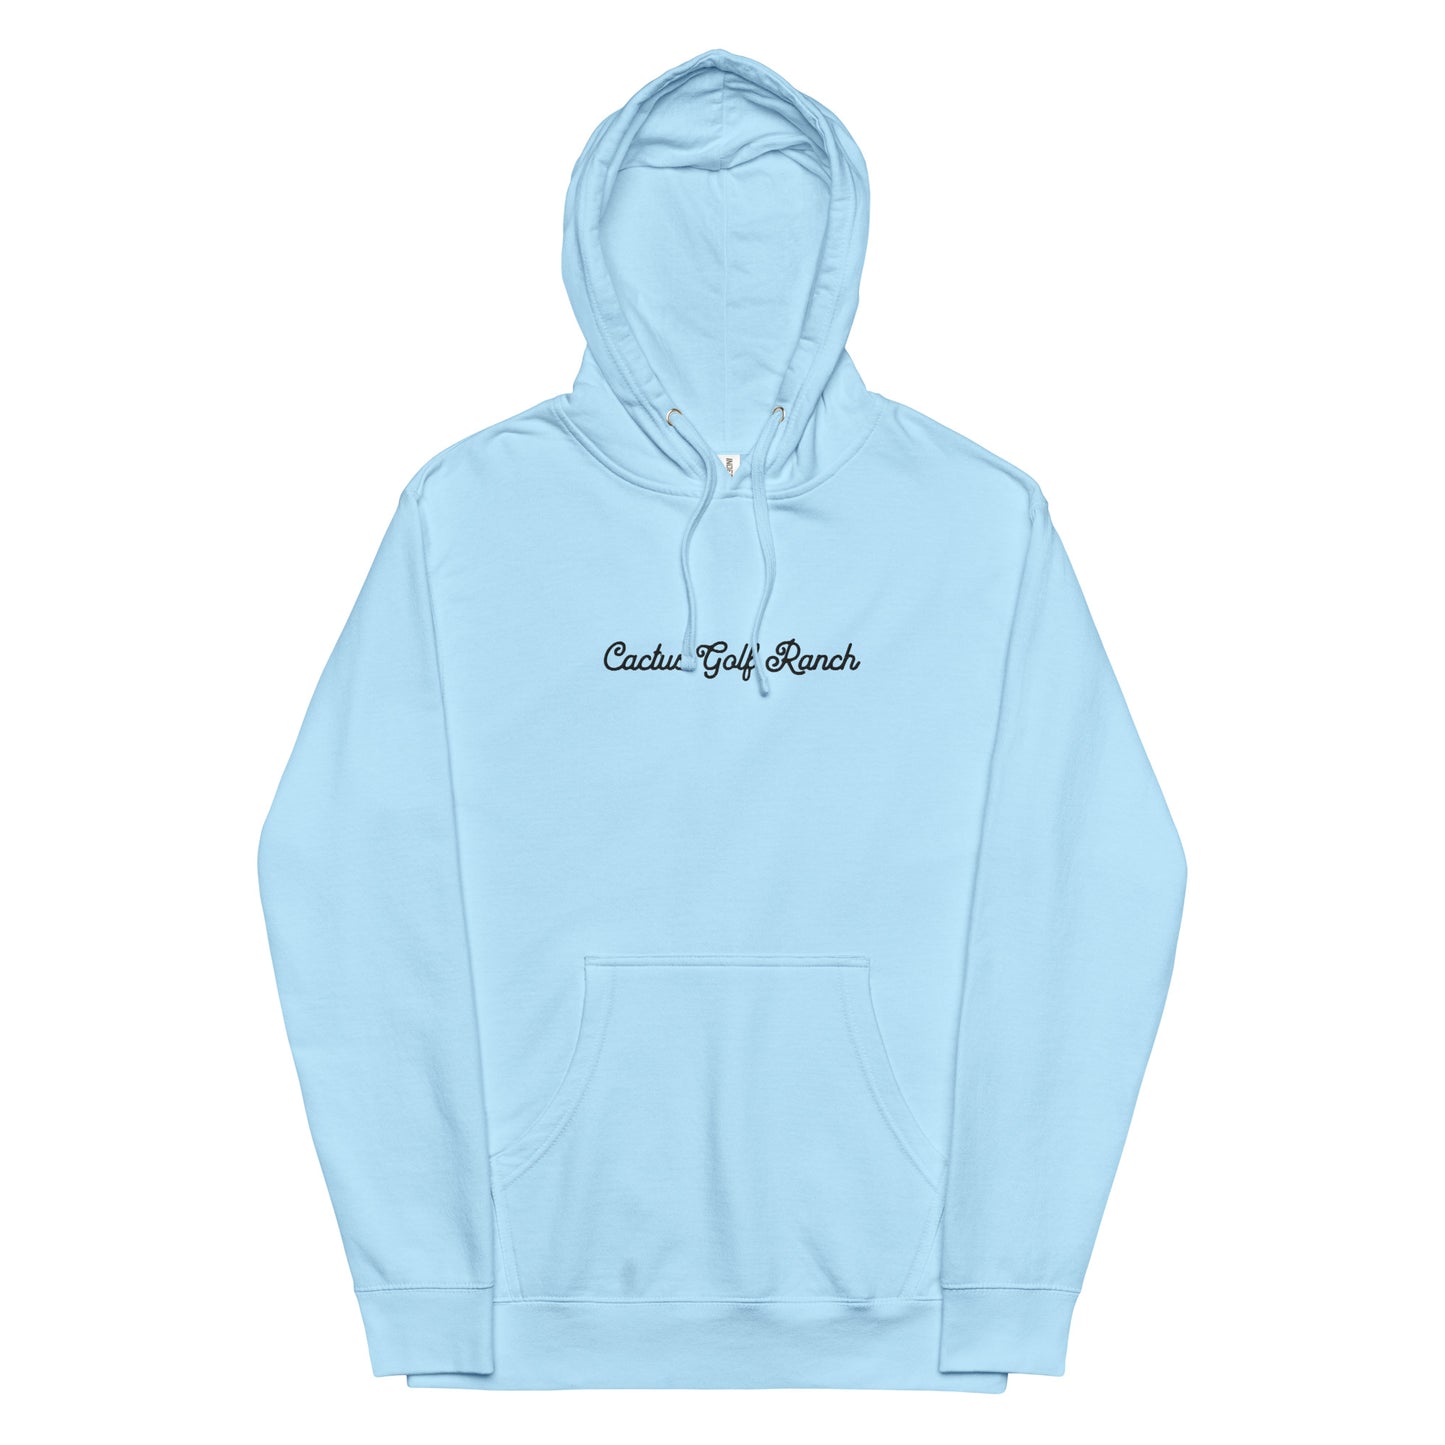 In hand Of The Golf Gods Midweight hoodie